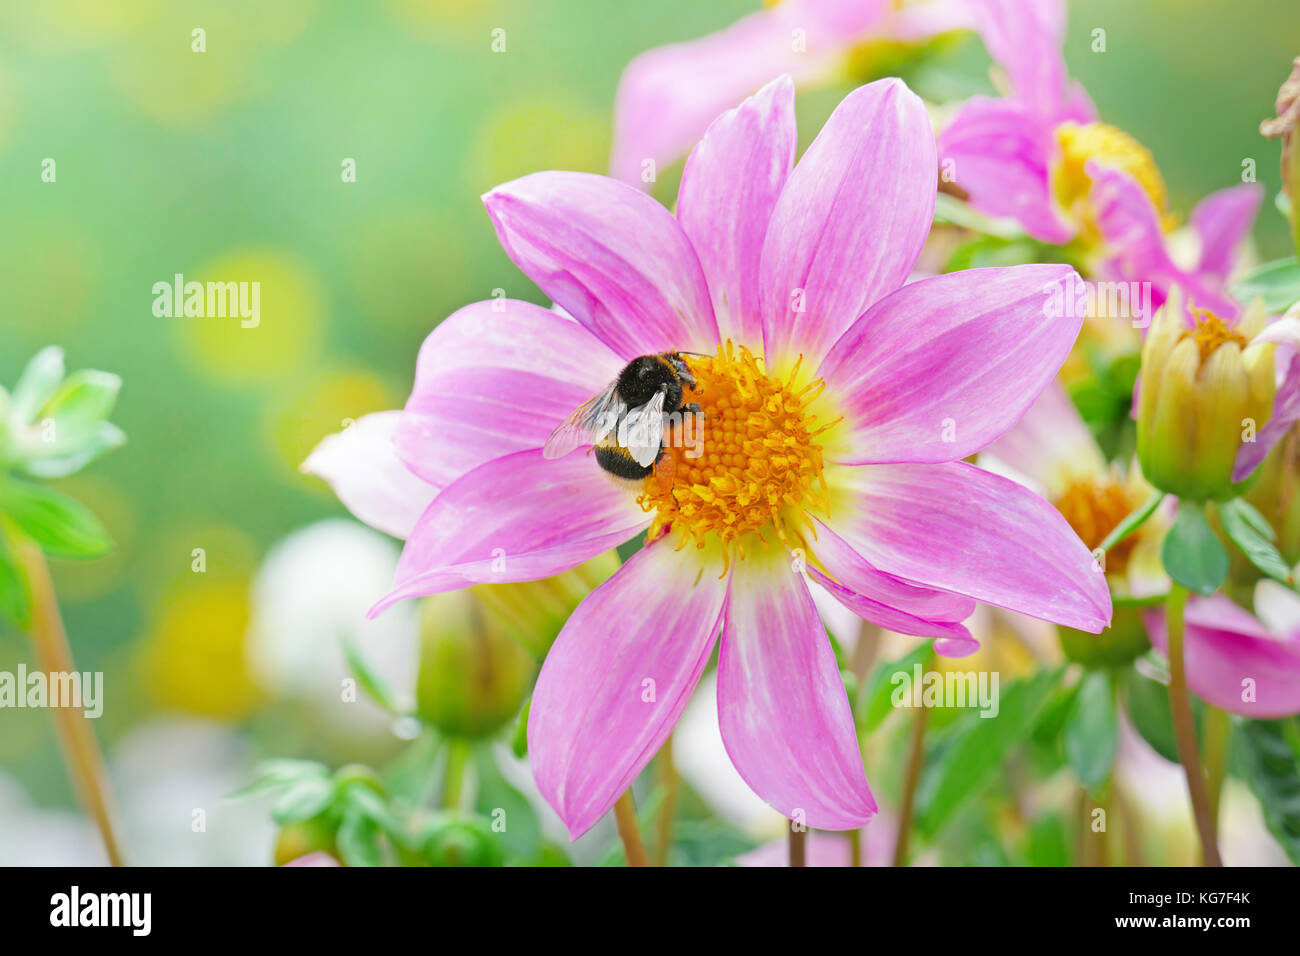 Large black bumble bee collects nectar on a dahlia. Focus on a flower. Shallow depth of field. Stock Photo